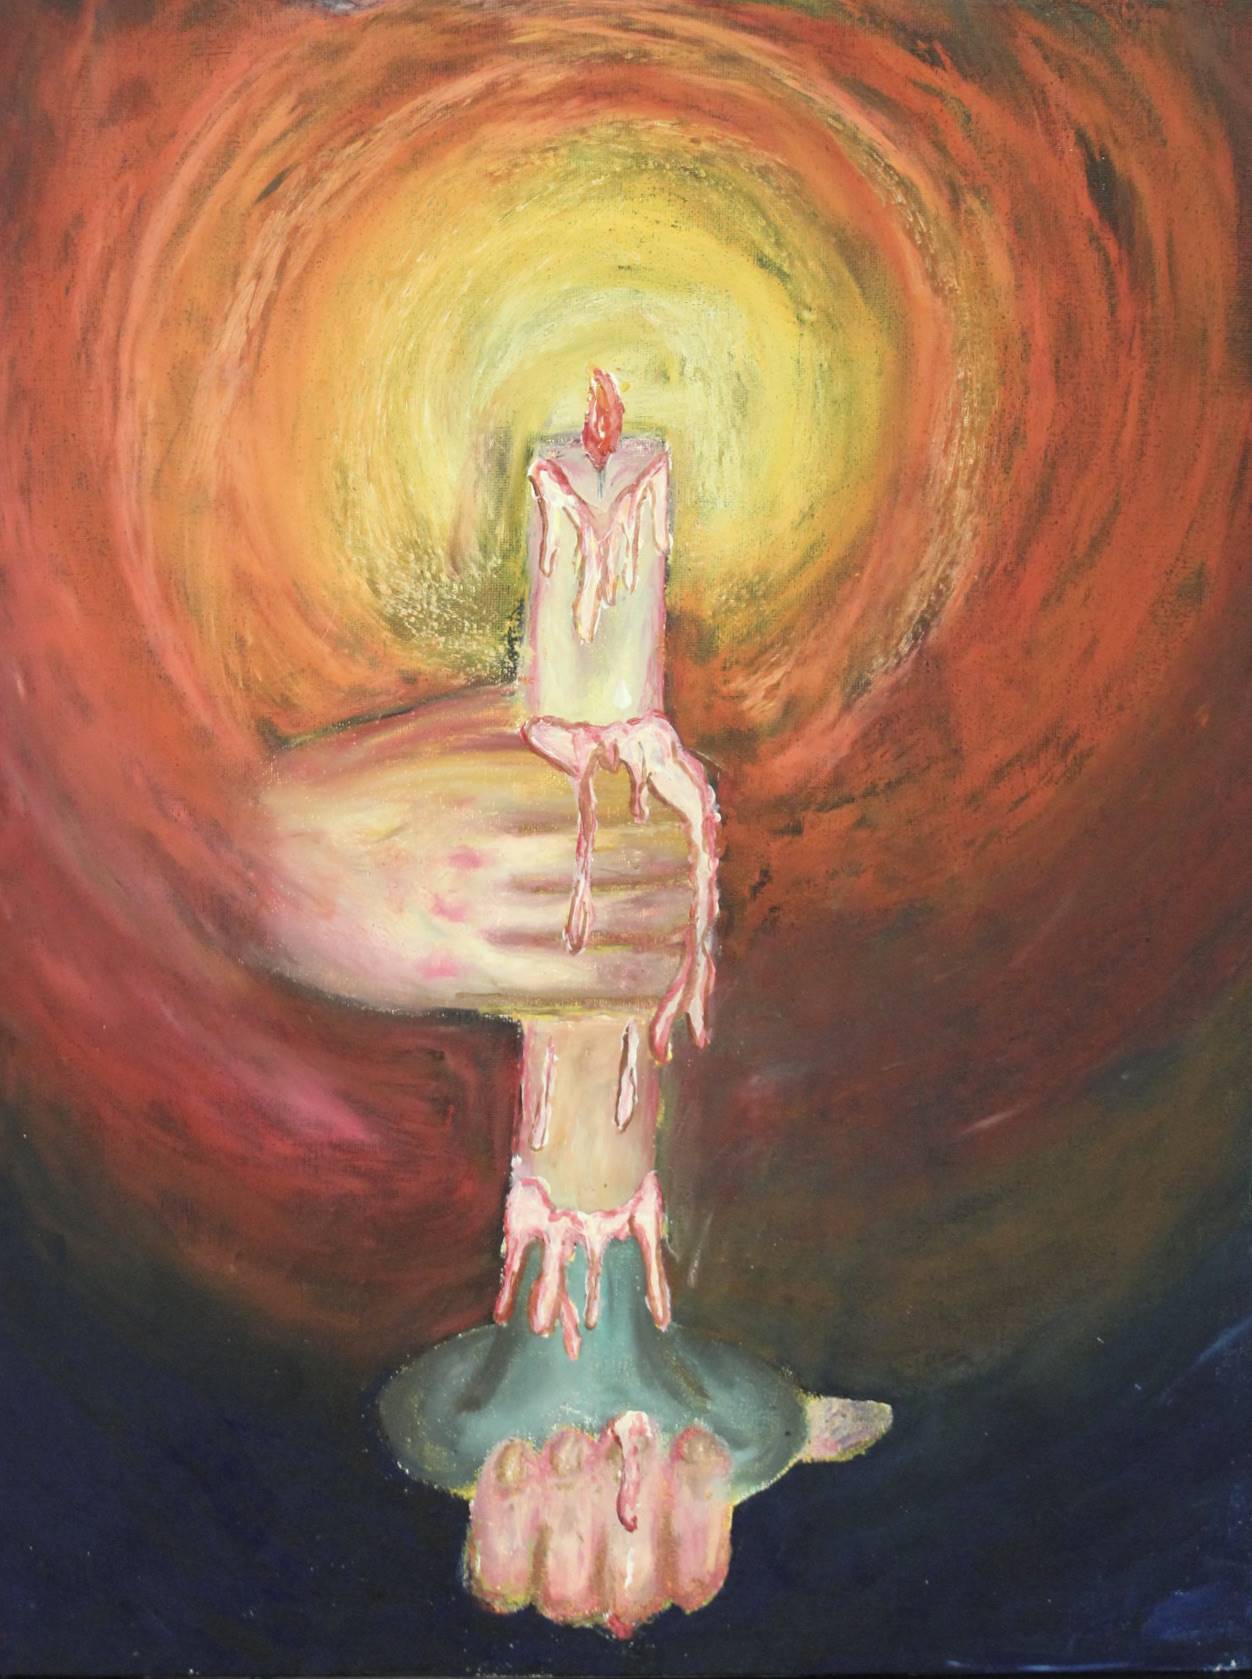 HS art work of somone holding a candle